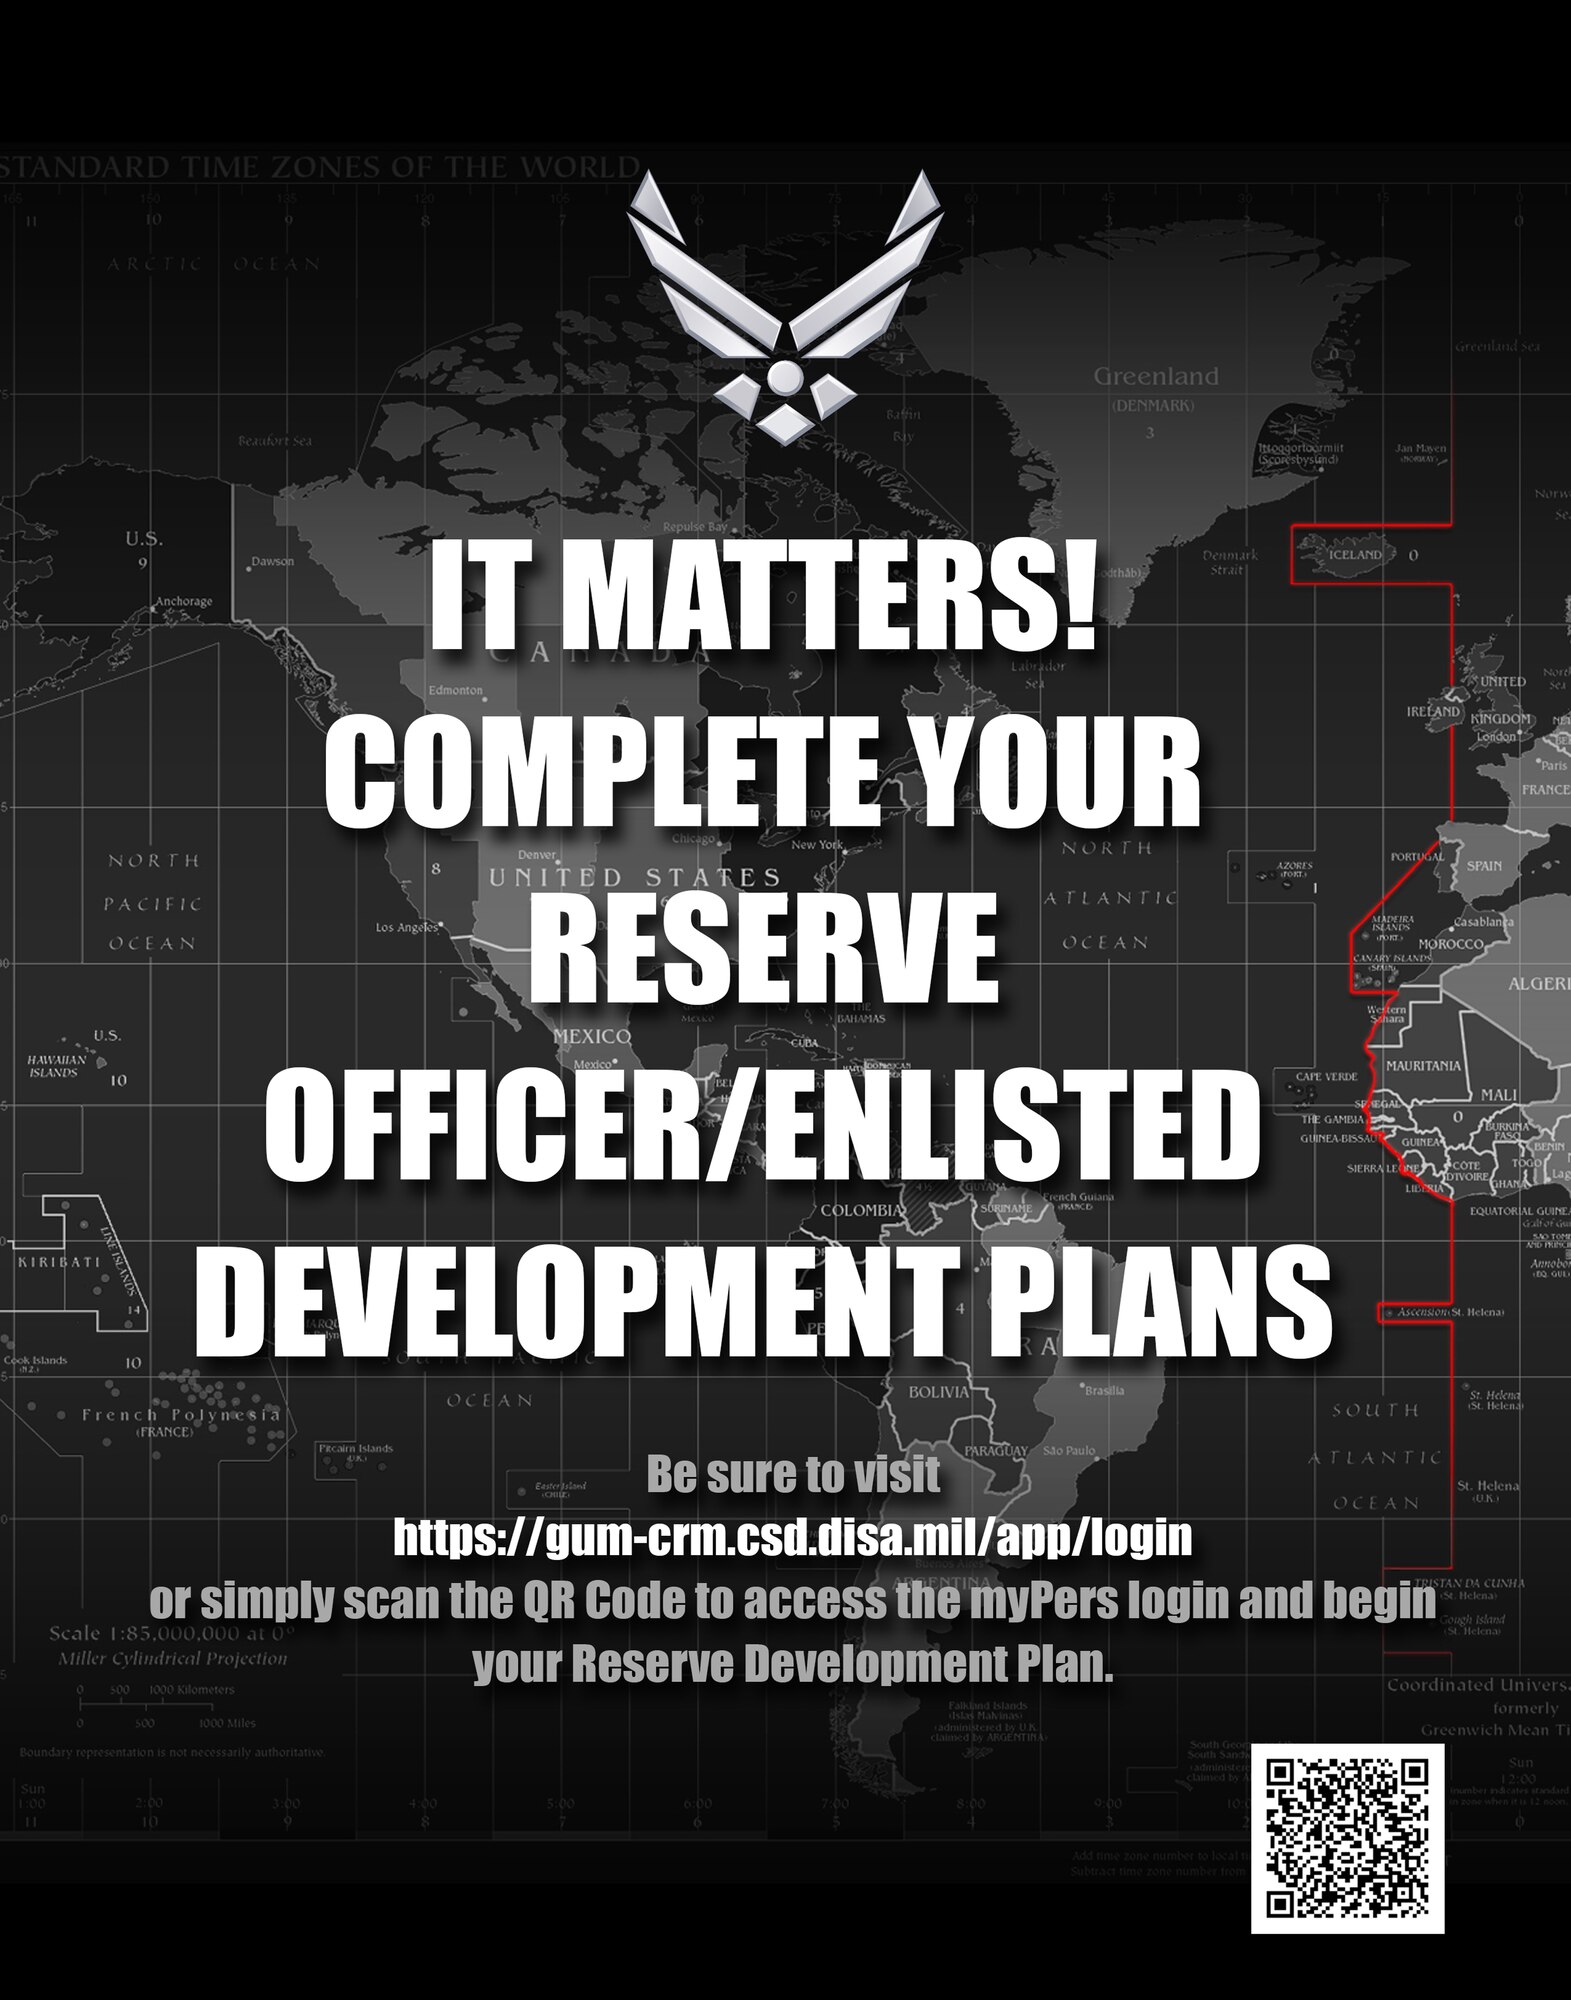 Don't forget to update your Officer/Enlisted Force Development Plan at https://gum-crm.csd.disa.mil/app/login/redirect/home  